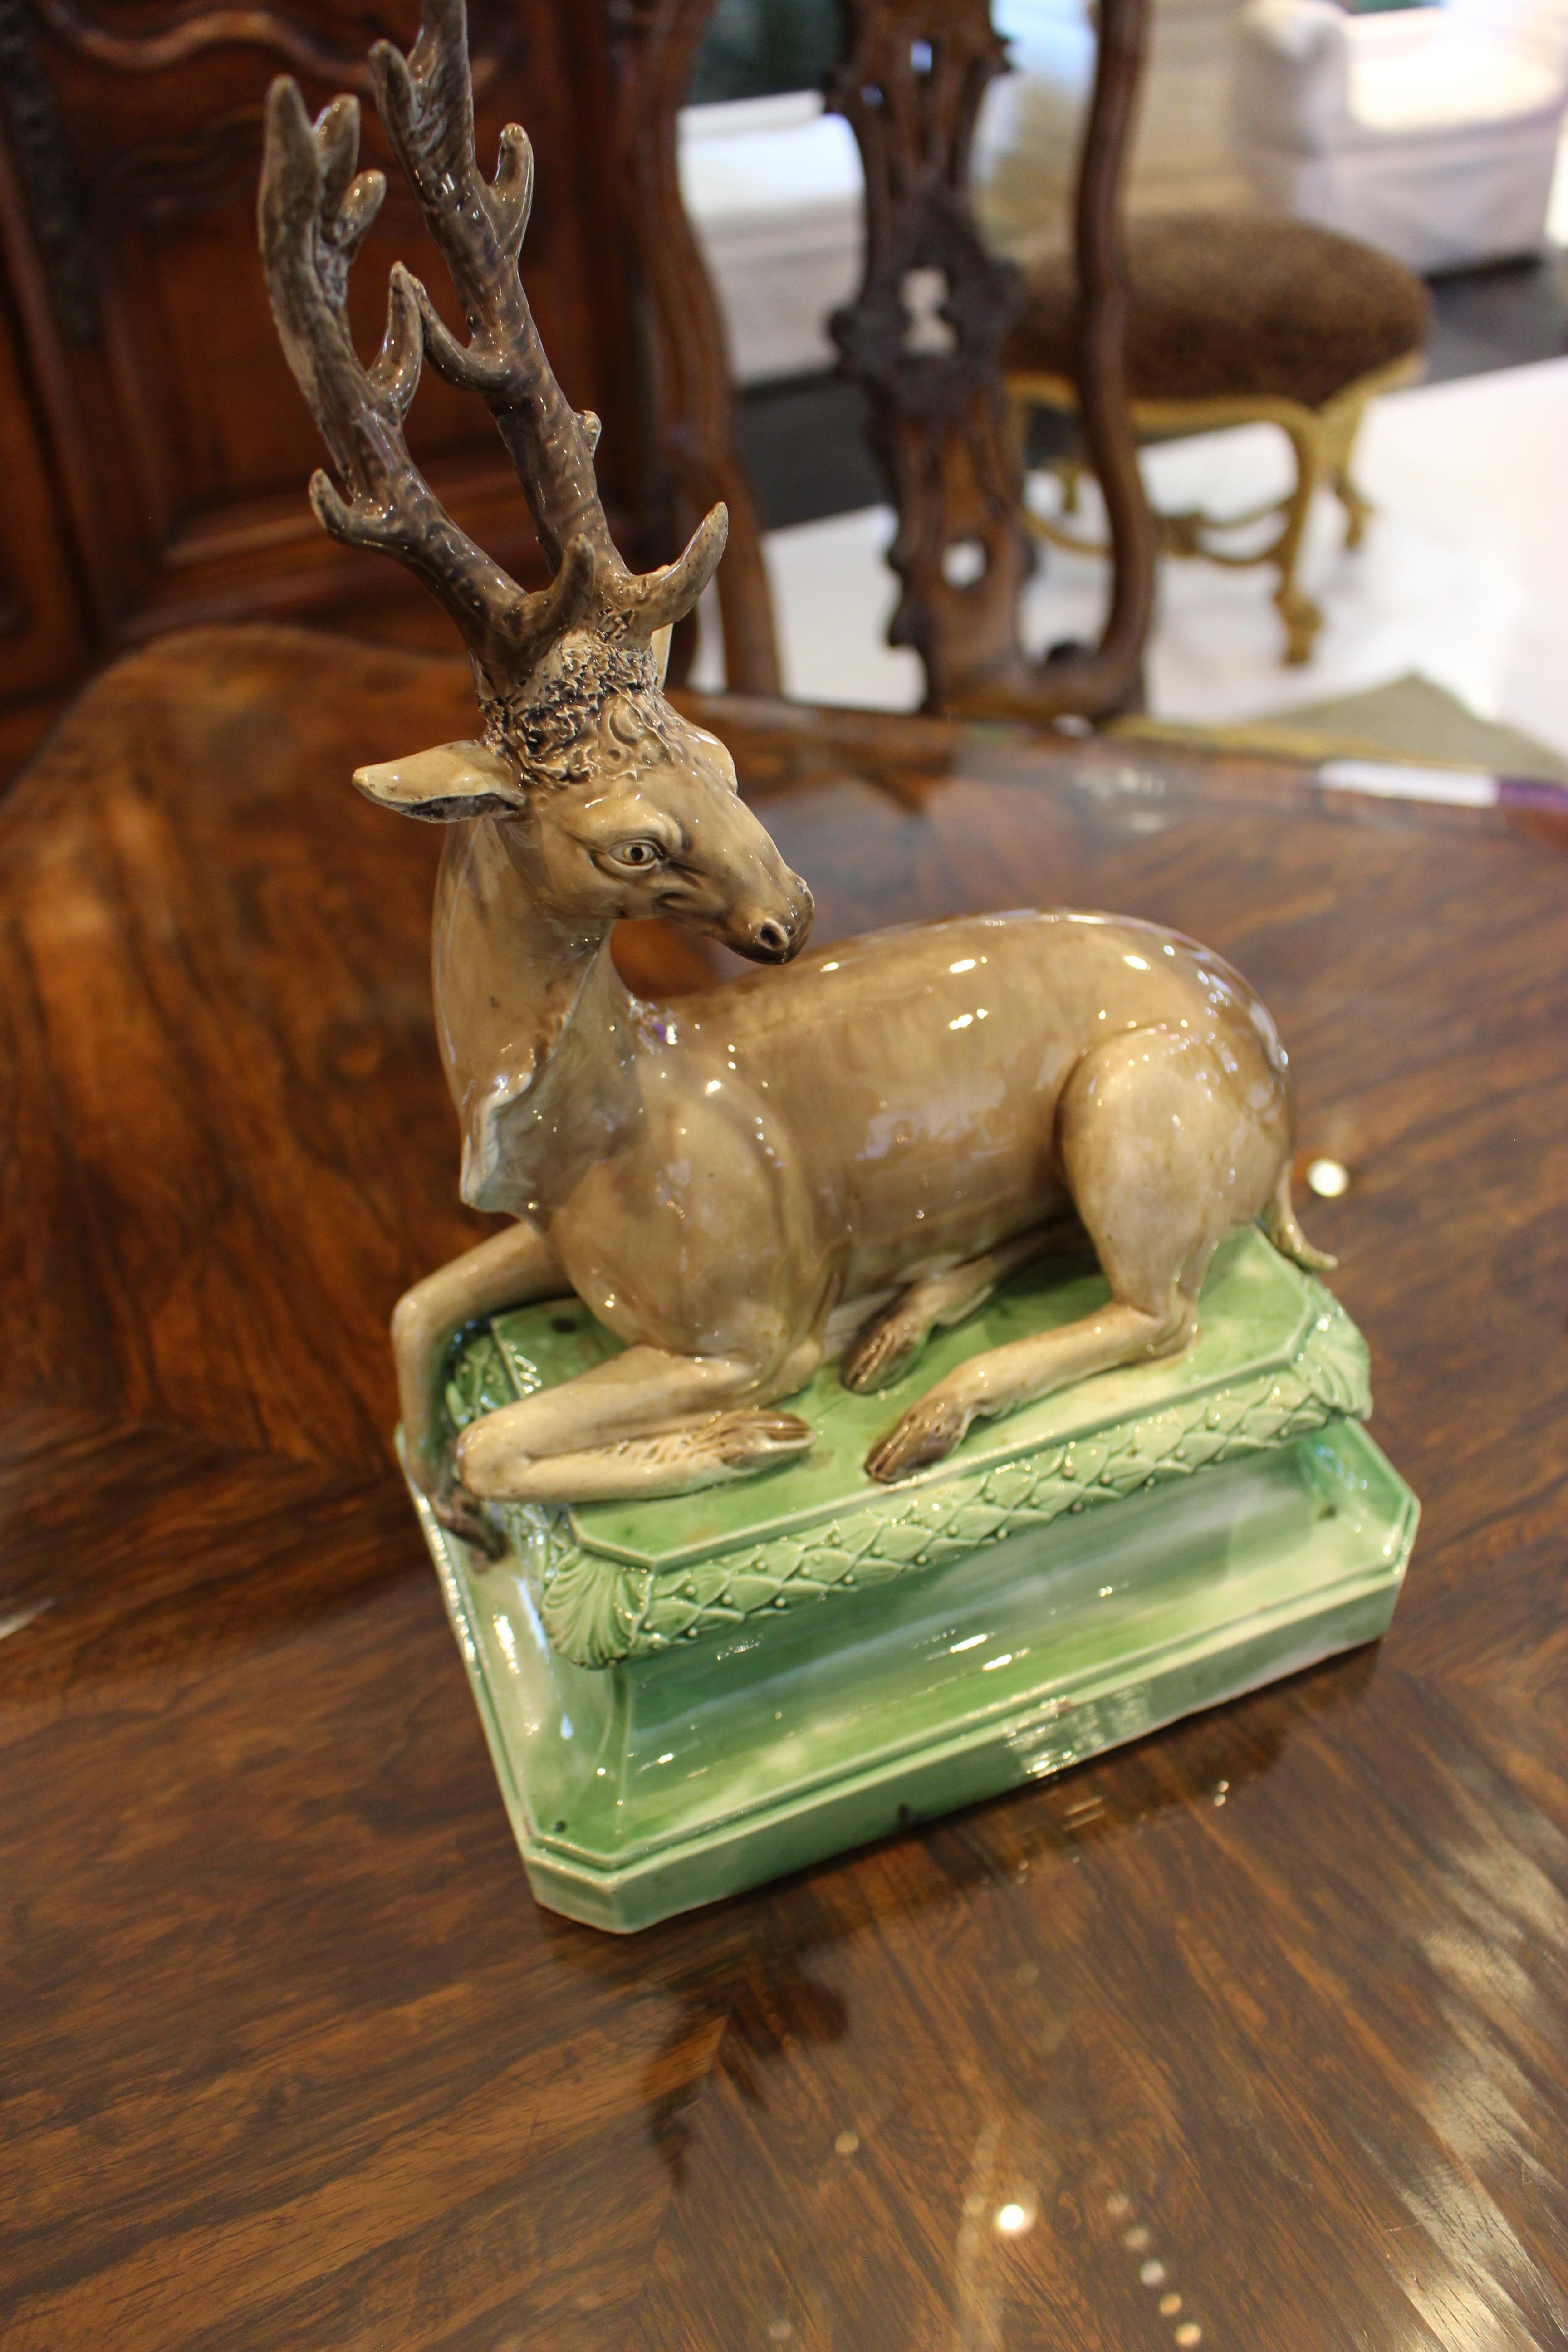 Staffordshire Pearlware model of a stag seated on a waisted green-washed rectangular base. From the collection of Peggy and David Rockefeller. Circa 1770.